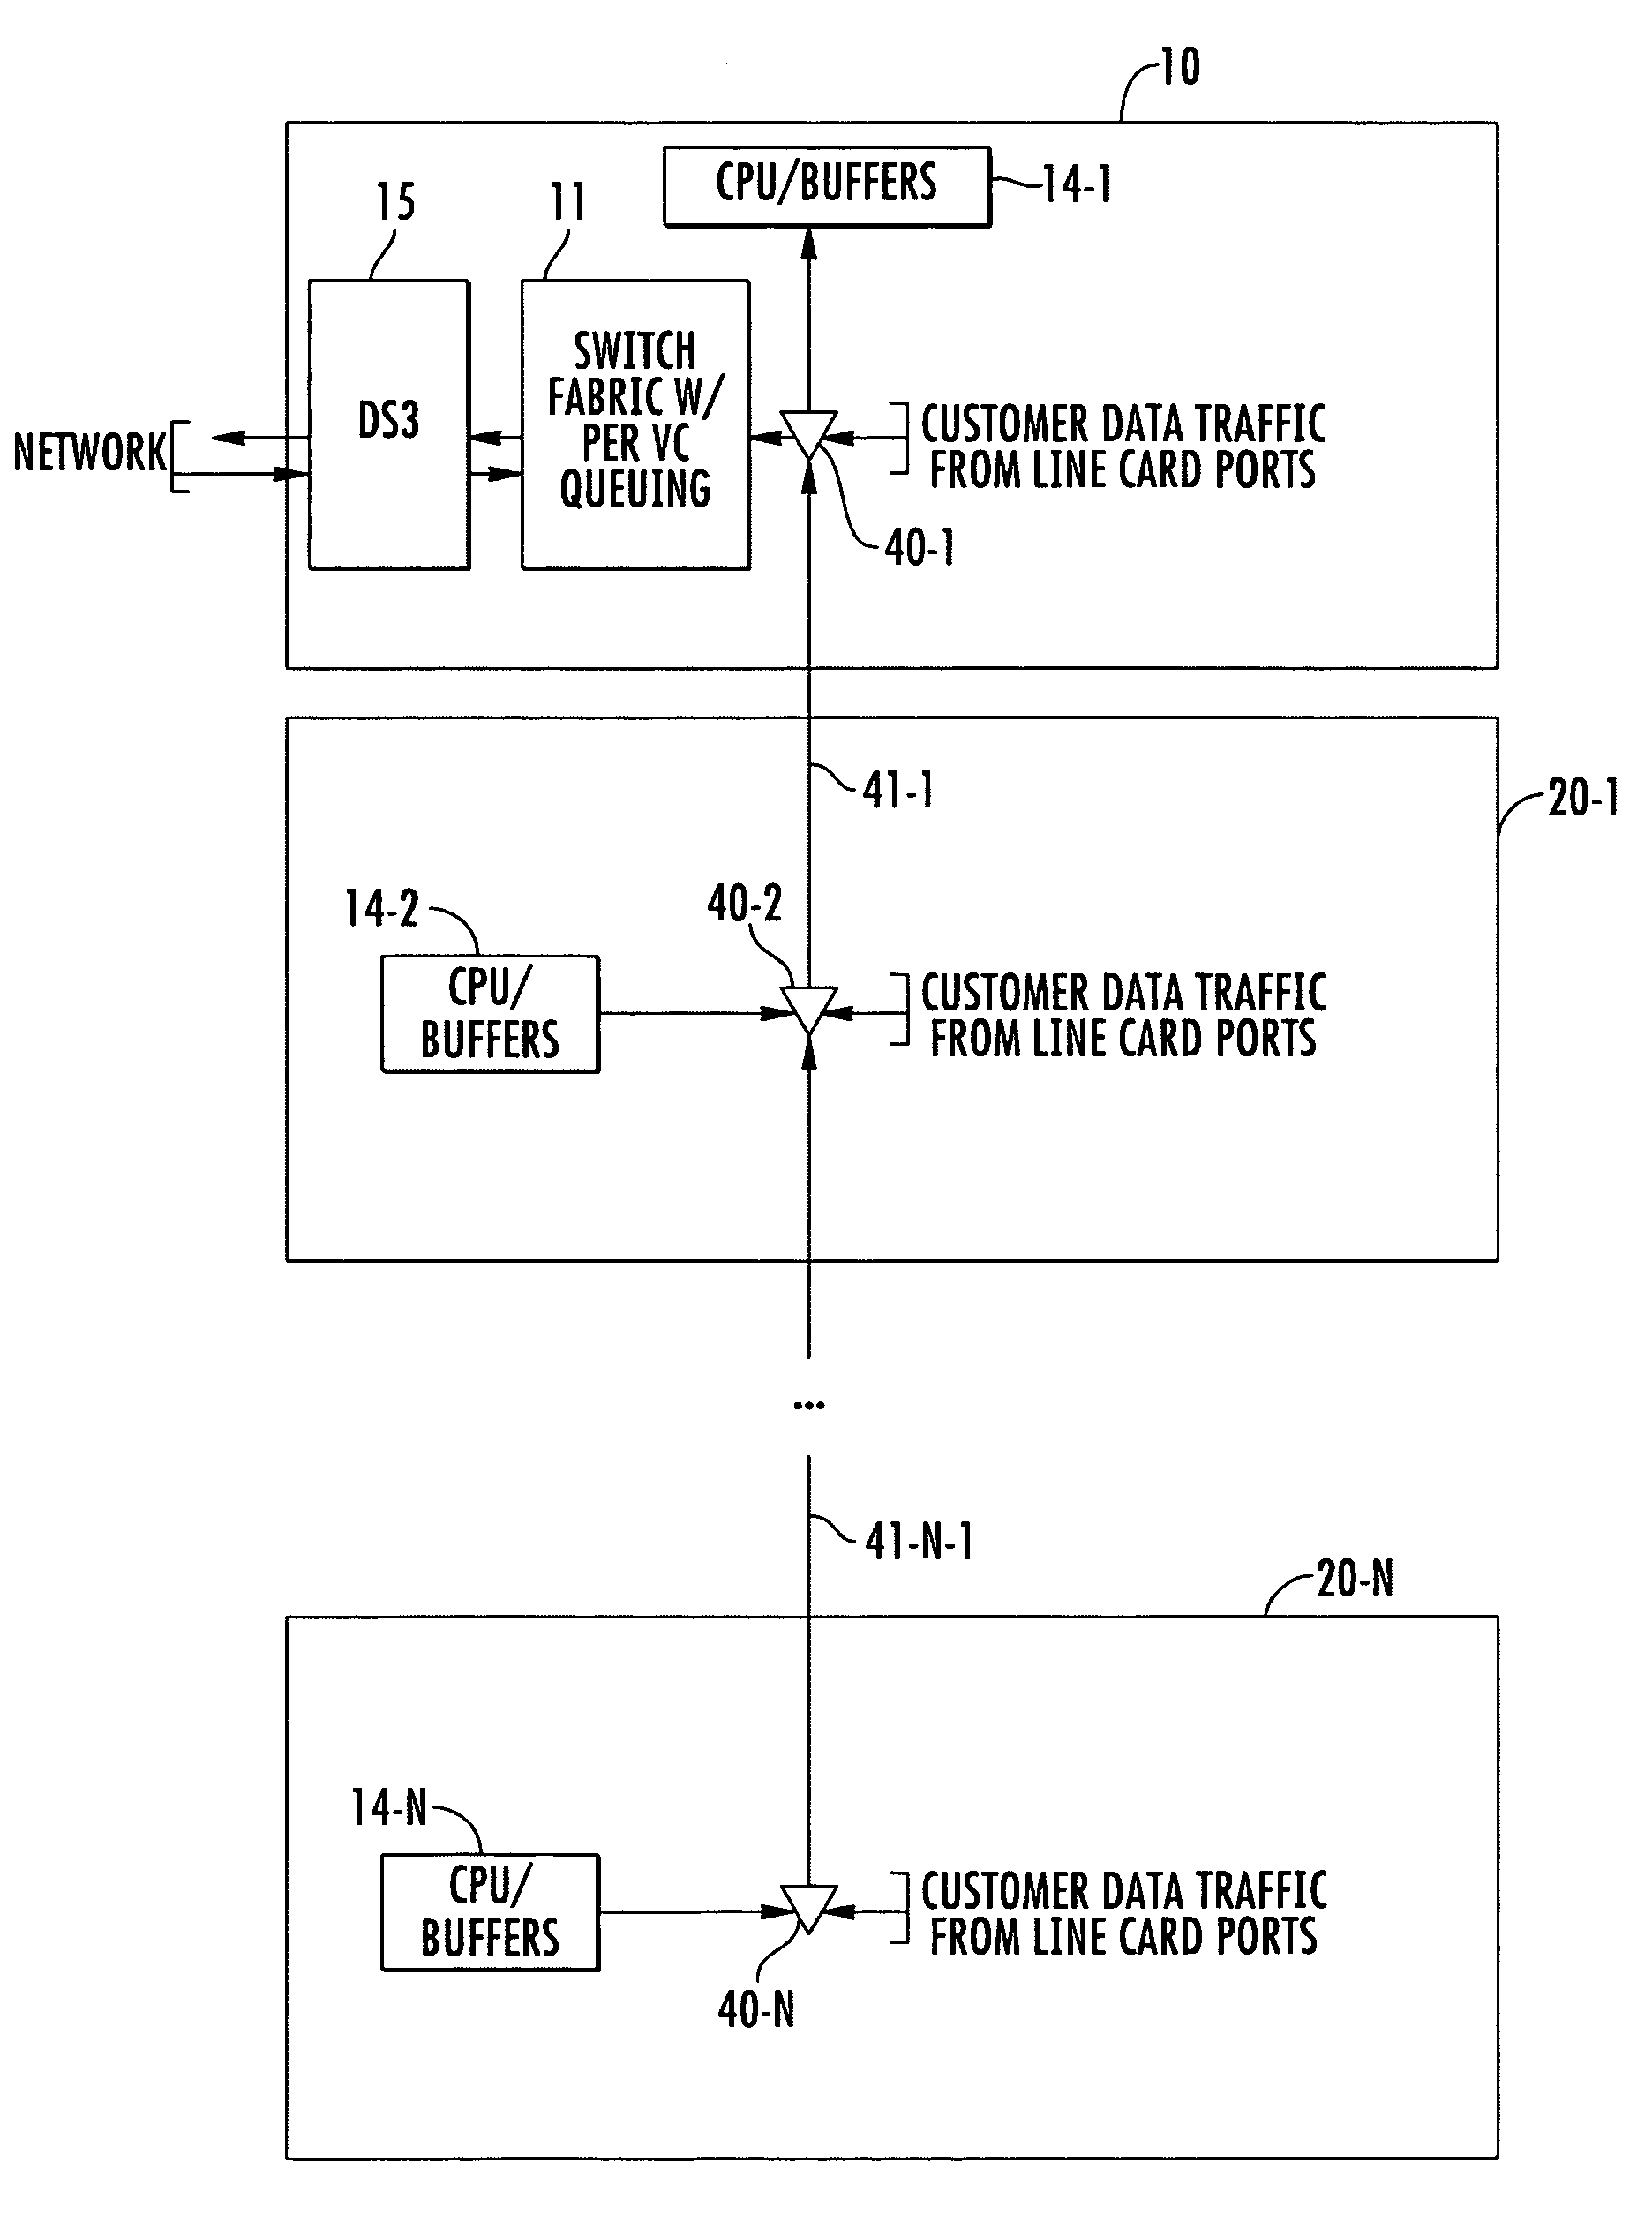 Method and system for preserving channel bank provisioning information when unit location changes within multi-shelf equipment rack